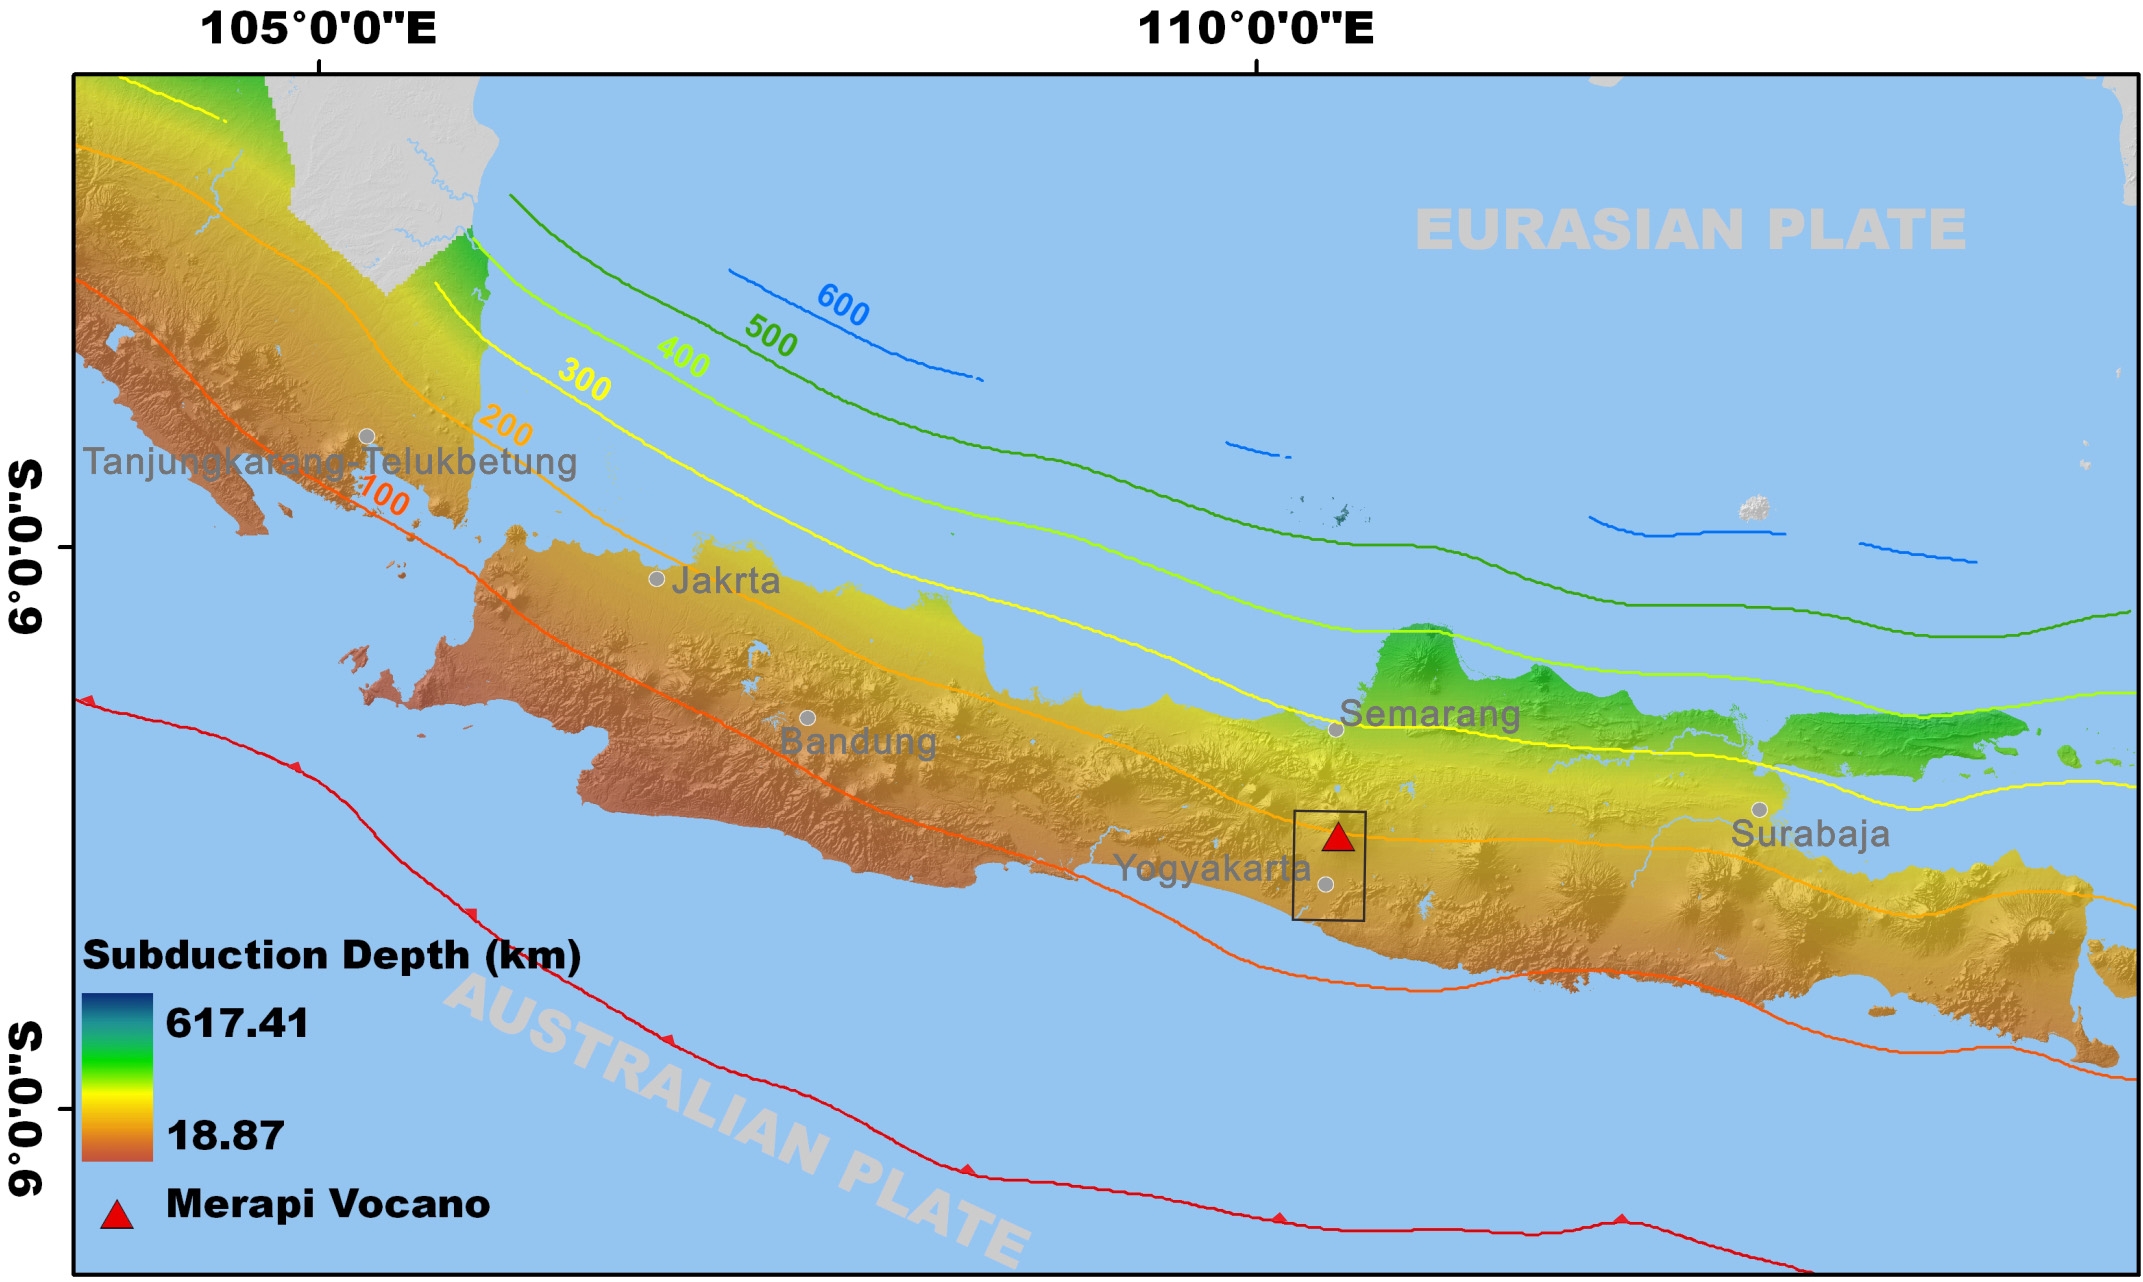 Fig. 3.2.1 Depth of Java subduction zone on Java Island, Indonesia. Red triangle is Merapi volcano